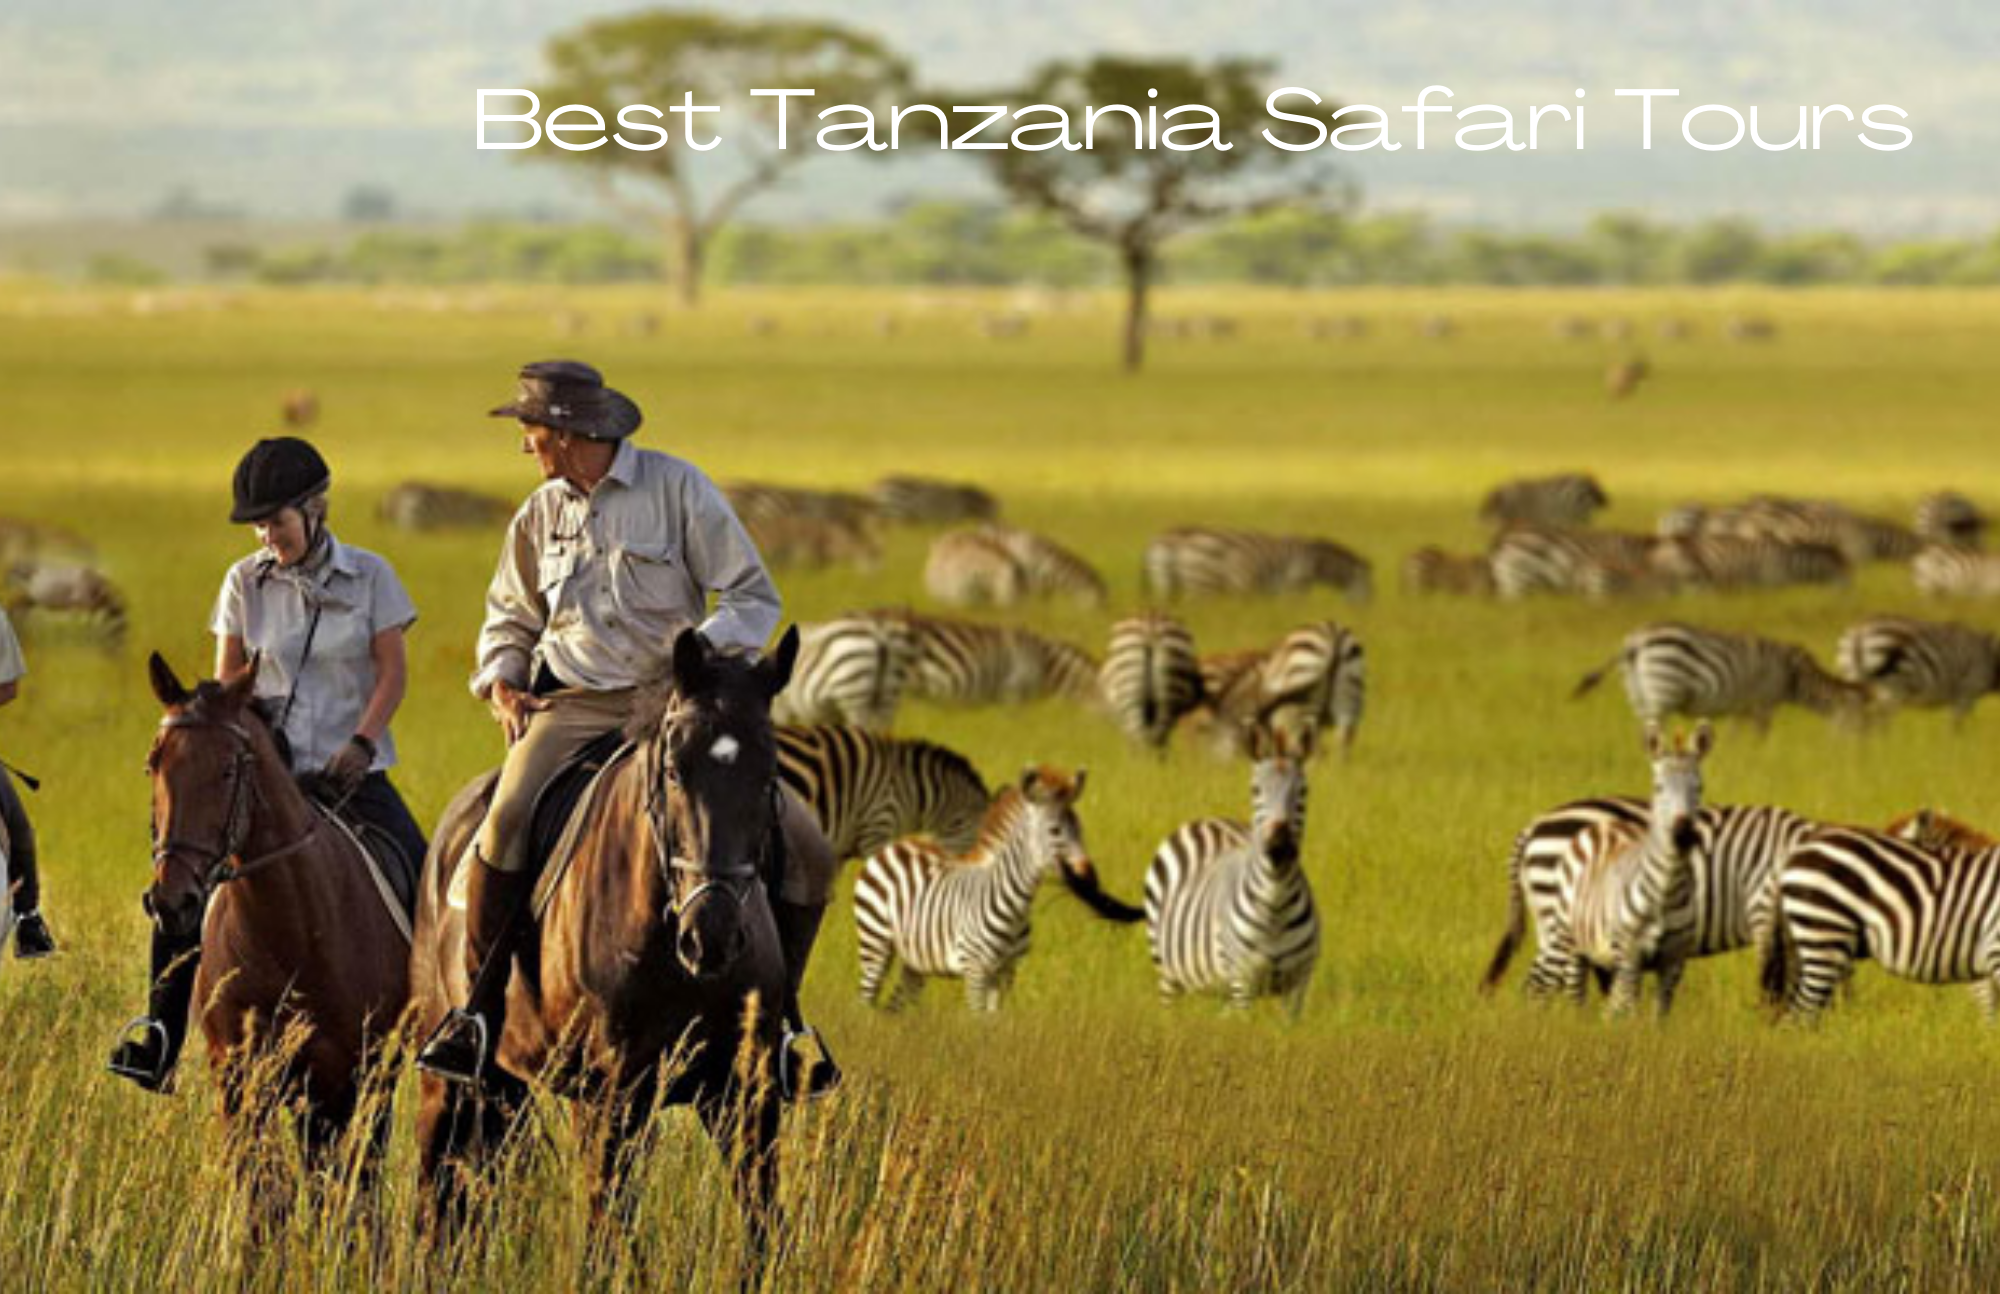 Best Tanzania Safari Tours - Check Out These 3 Places You Must Visit!